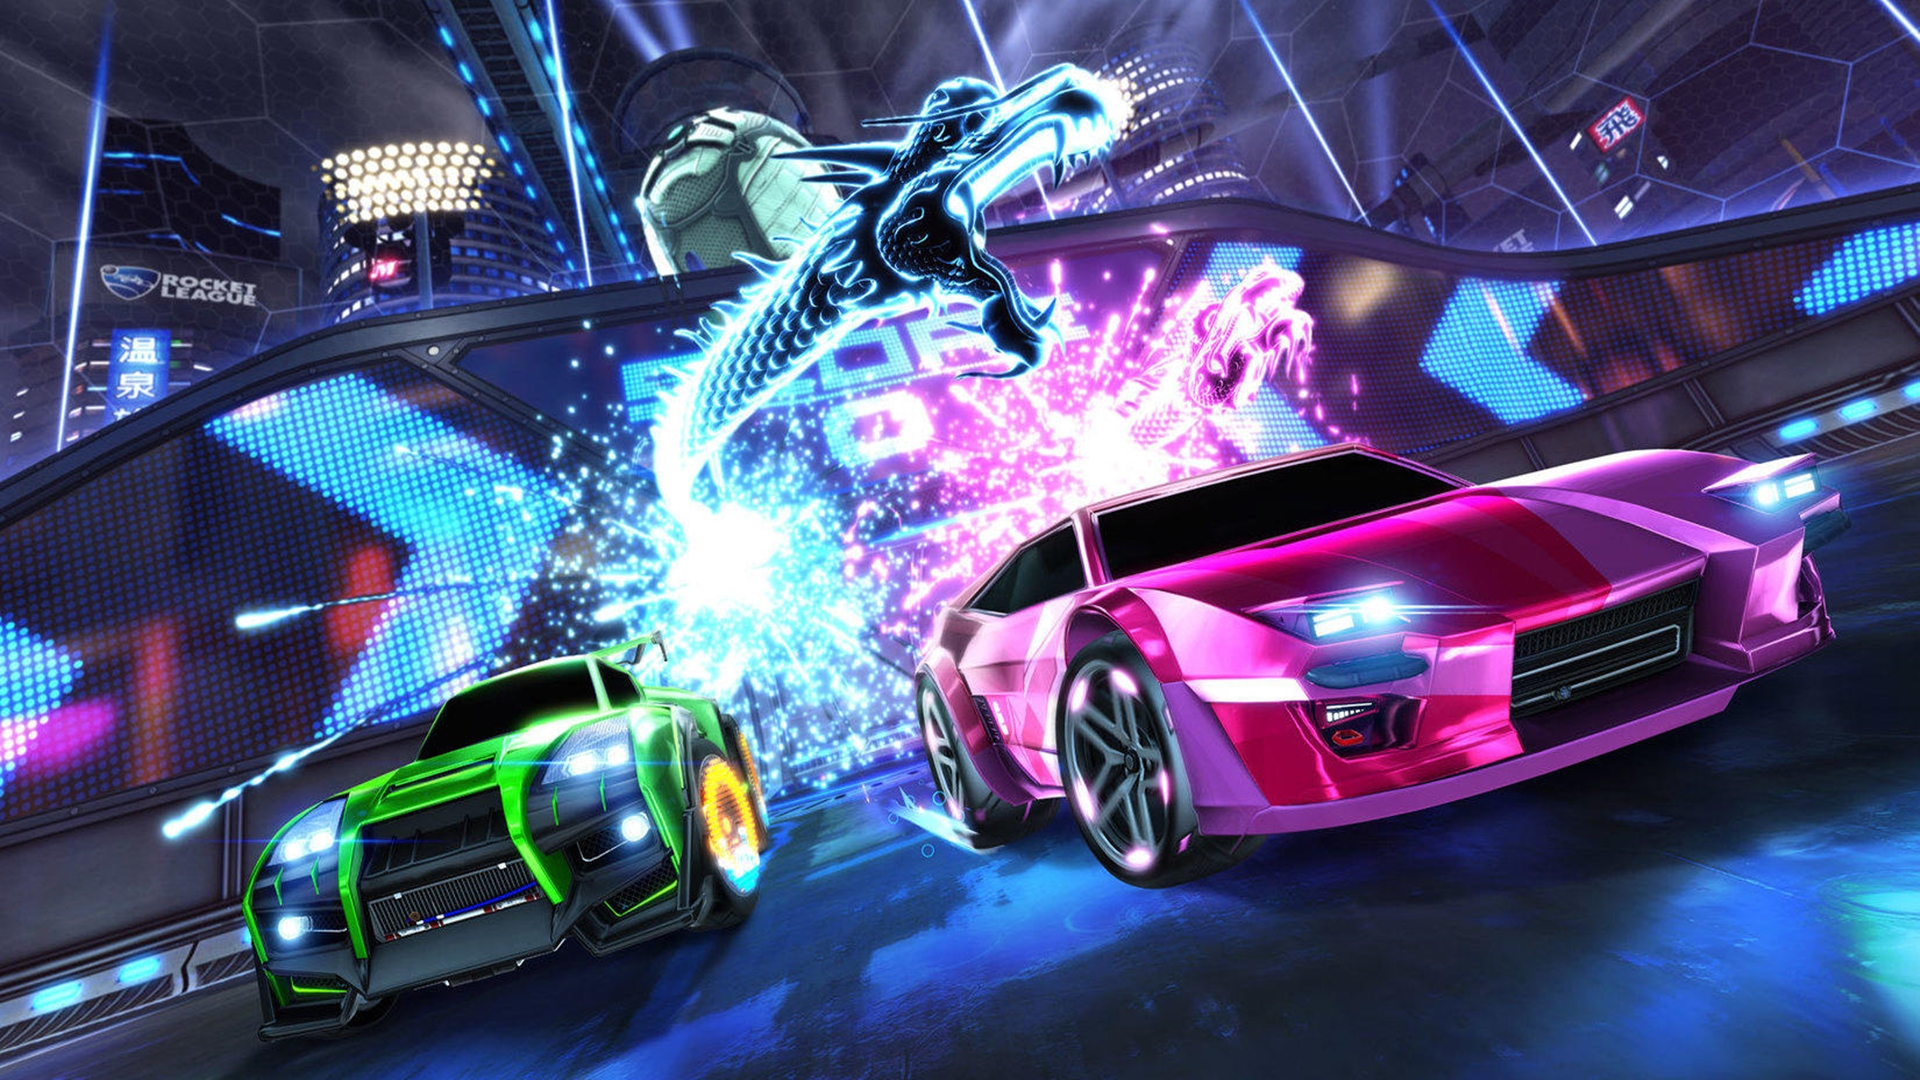 1920x1080 120+ Rocket League HD Wallpapers and Backgrounds